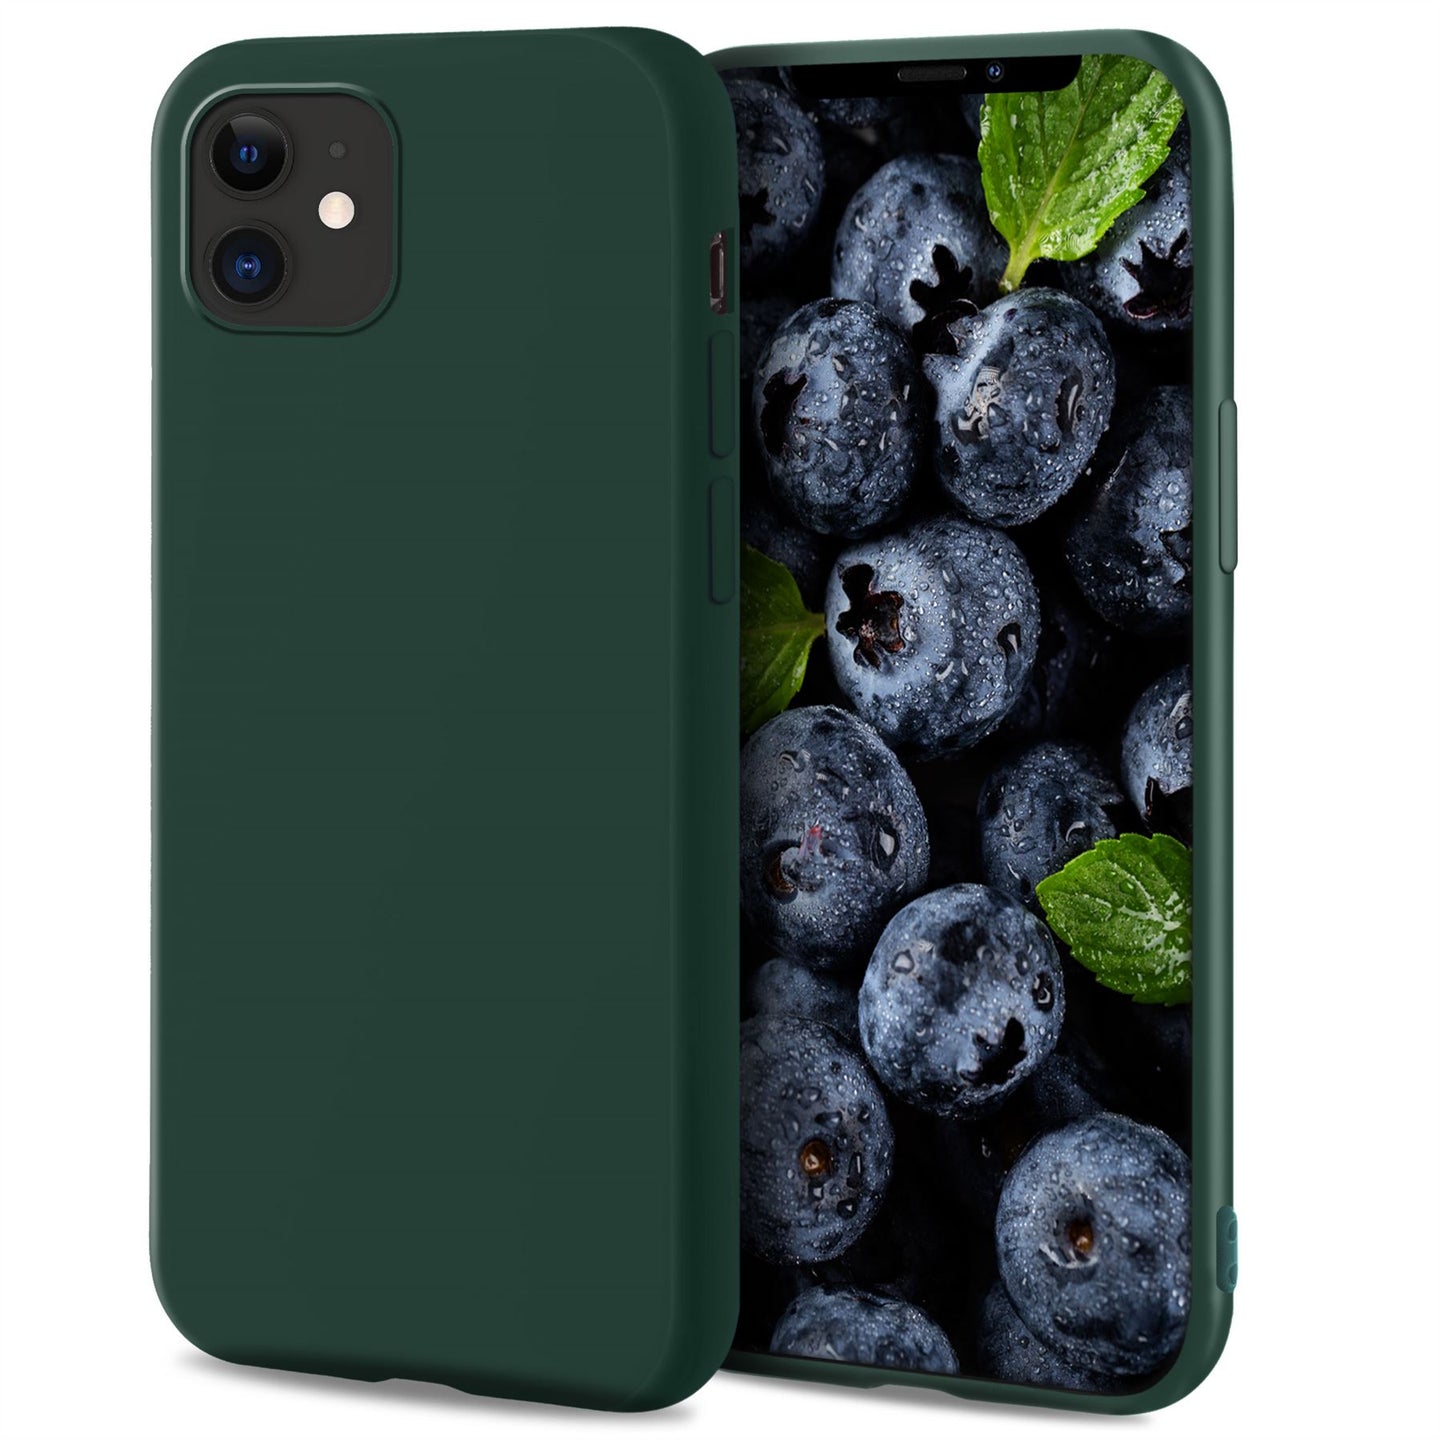 Moozy Lifestyle. Designed for iPhone 12 mini Case, Dark Green - Liquid Silicone Cover with Matte Finish and Soft Microfiber Lining